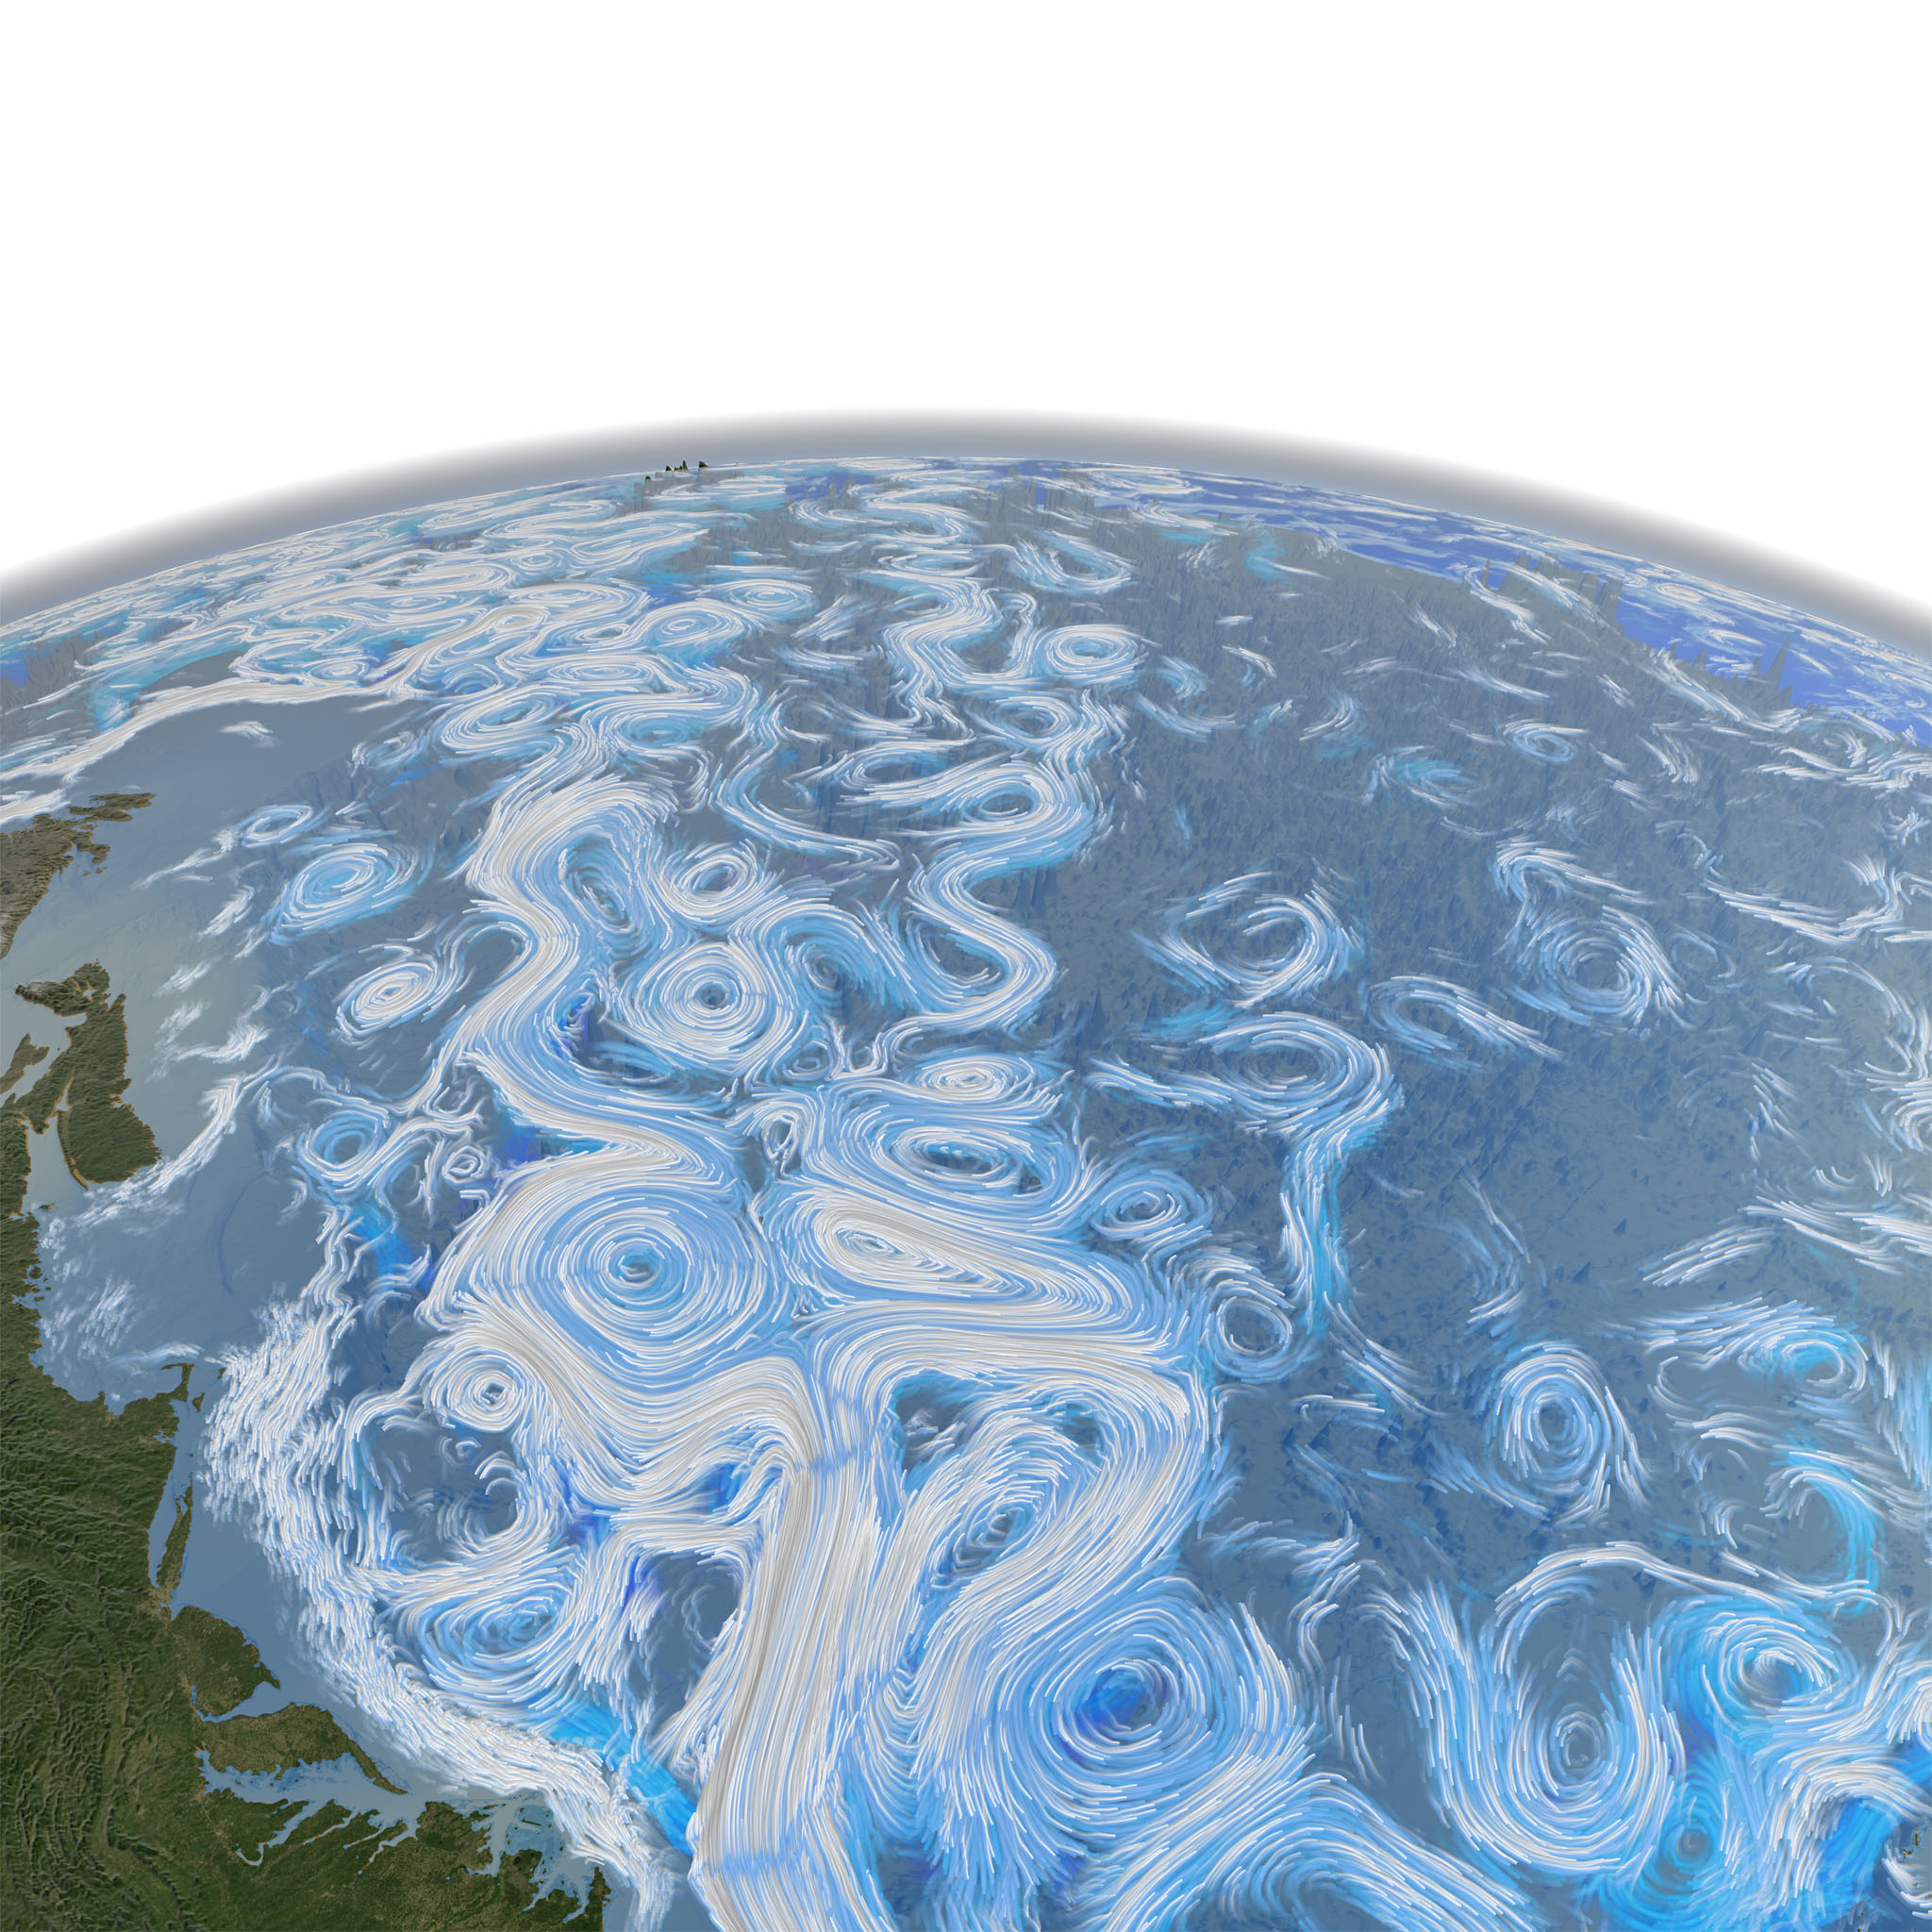 Still image layer rendered for the Dynamic Earth movie poster showing the Gulf Stream flowing from the East Coast of the US off into the North Atlantic